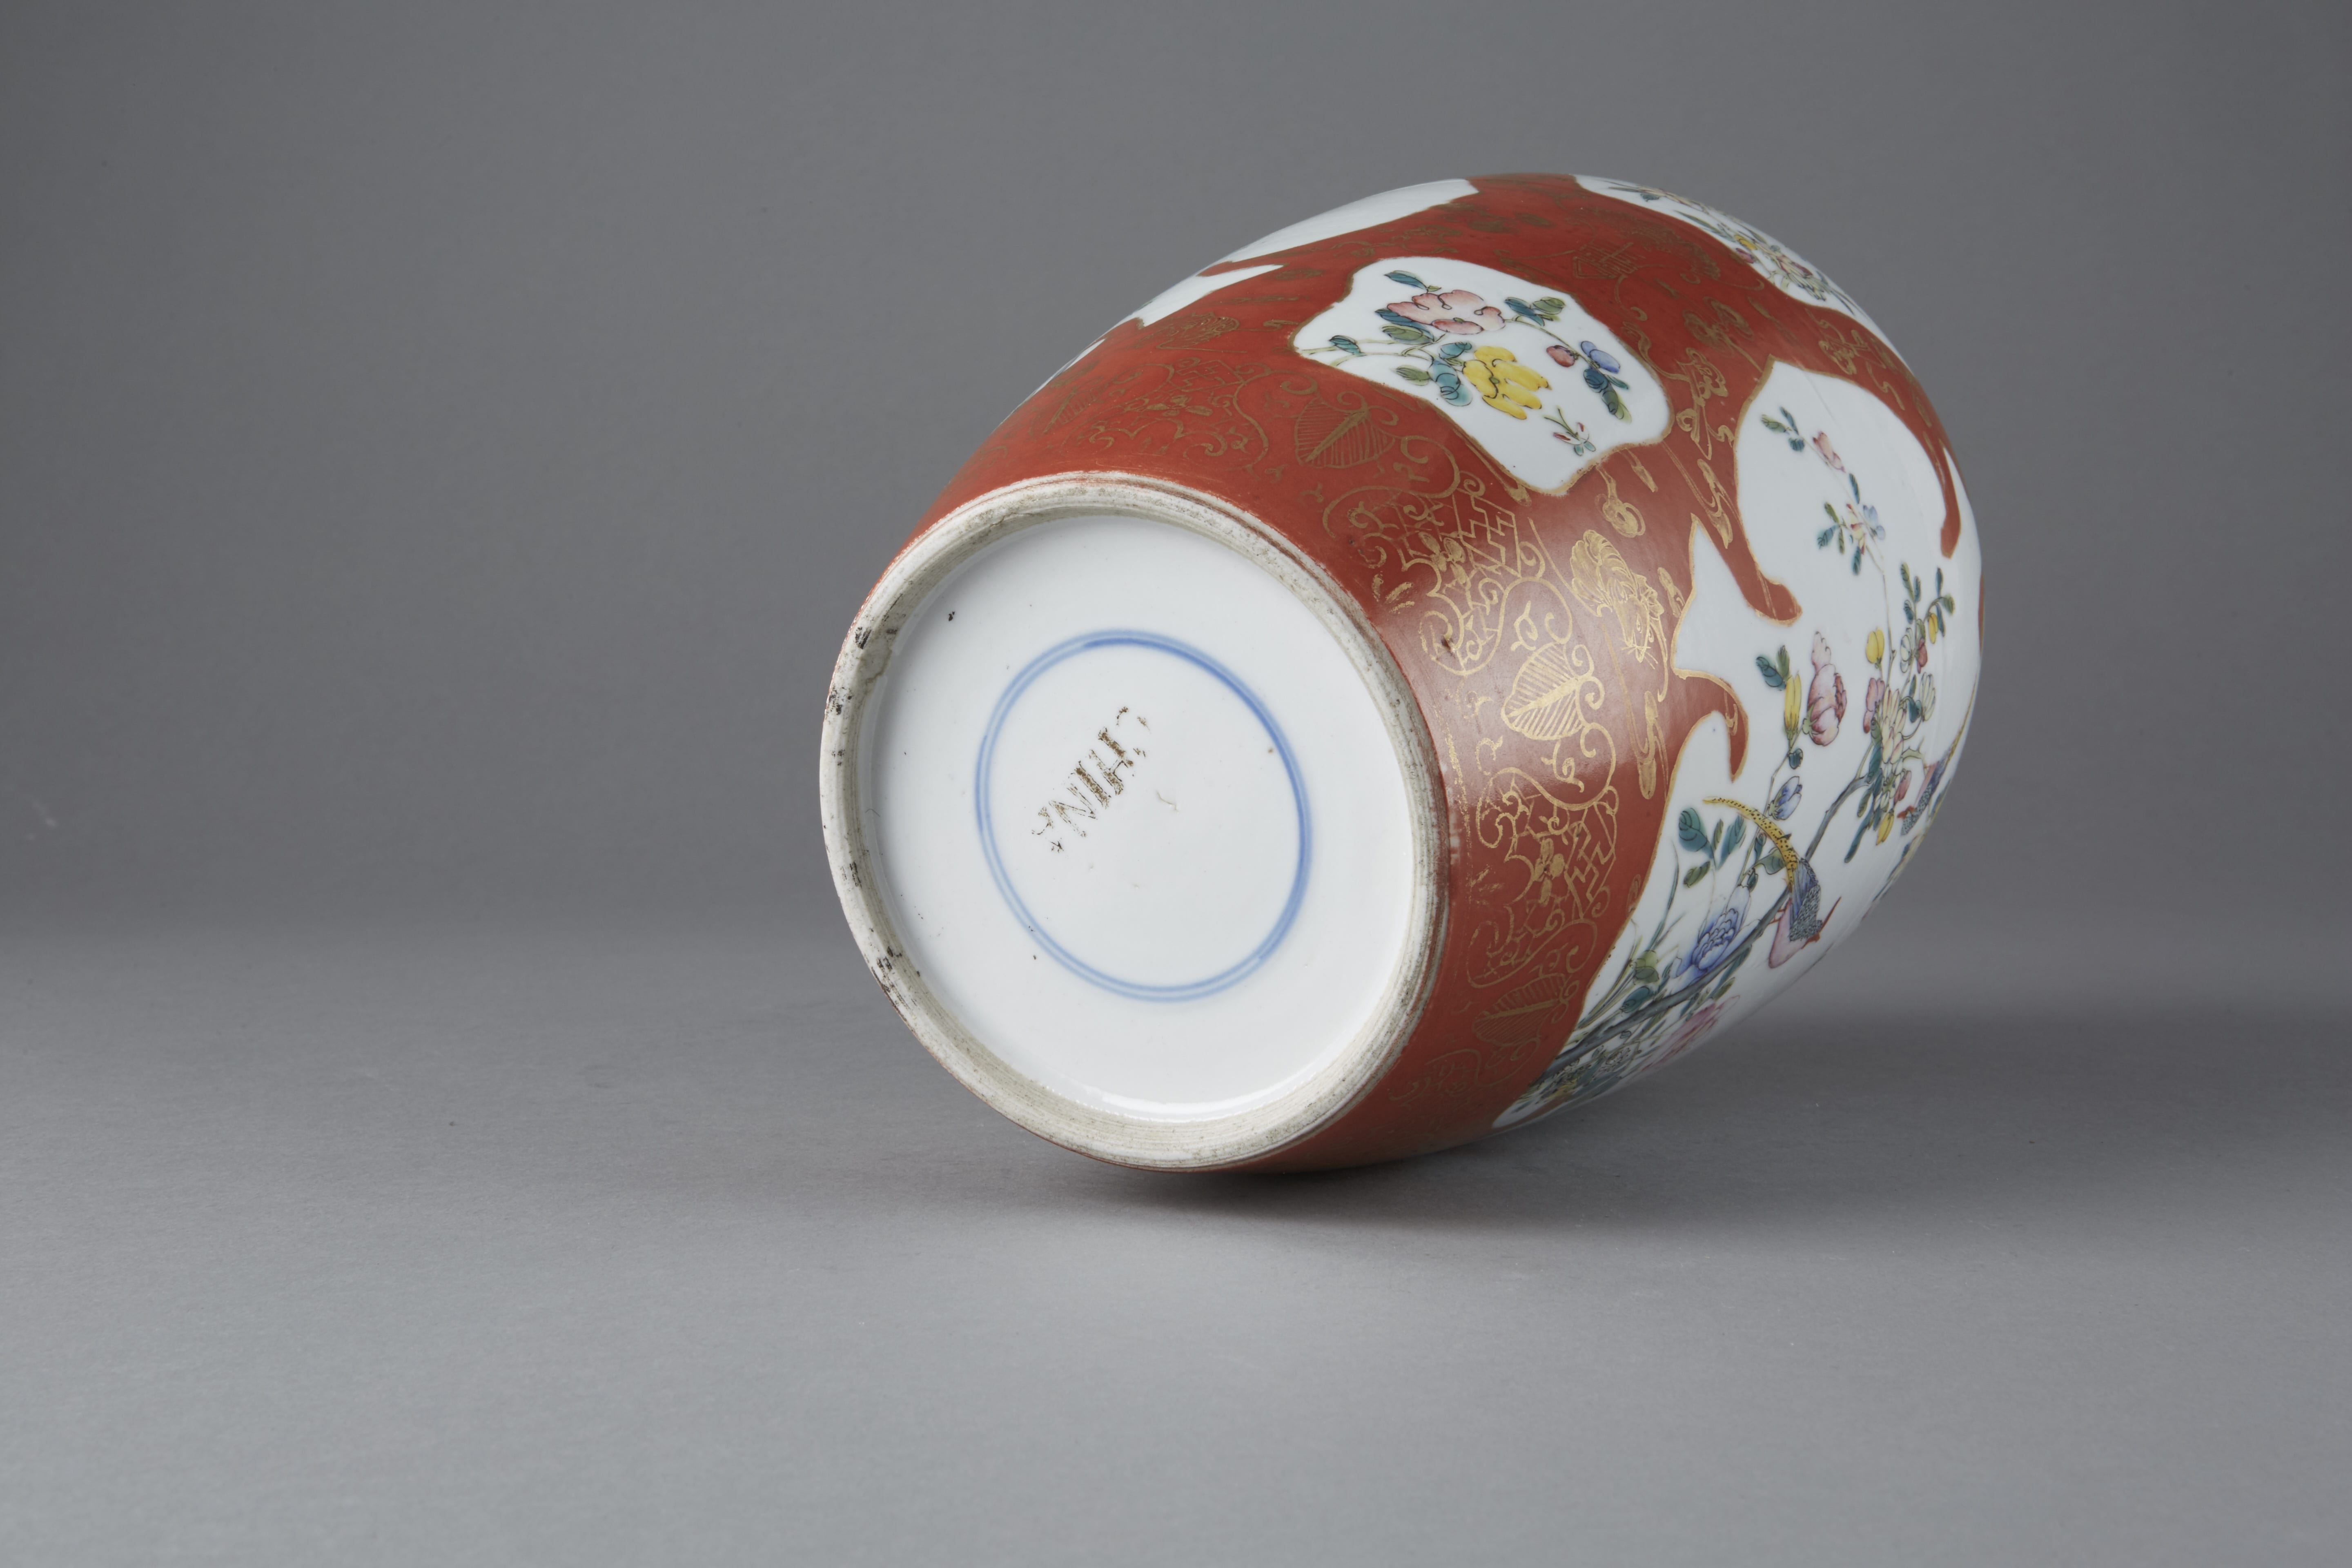 Lot 062: Chinese Guangxu Period famille rose coral ground Porcelain Ginger Jar and lid